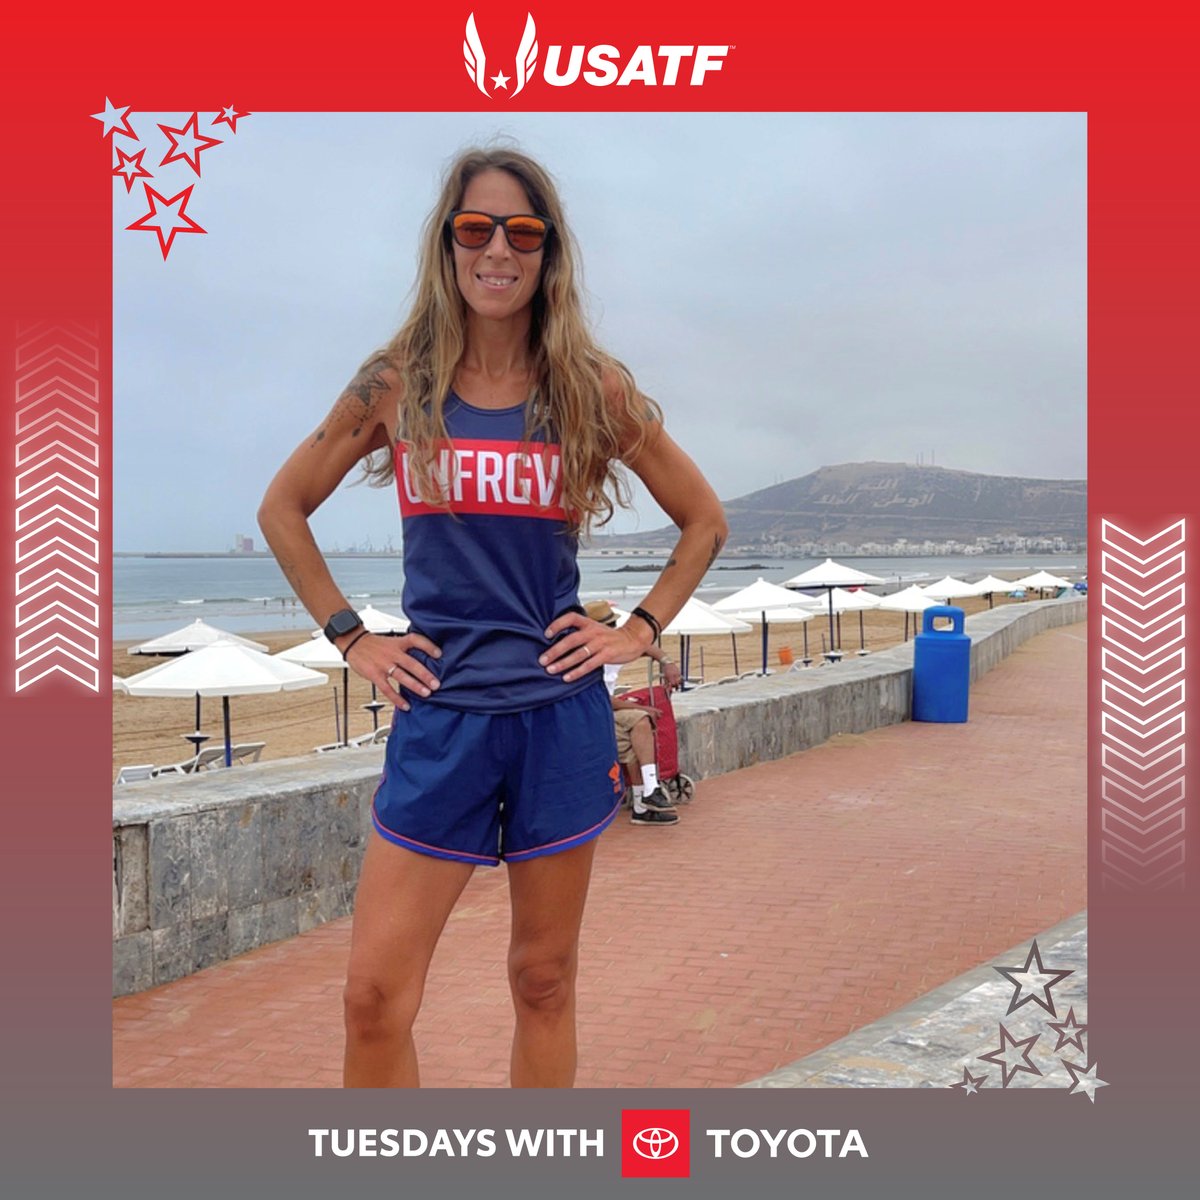 usatf: Meet Kristin Bernaeyge, Octobers #TuesdayWithToyota feature.

Despite being told to hang up her sneakers after spinal surgery and a brain aneurysm, the USATF Level 1 coach and mom of two is running marathons.  

Read more here: …